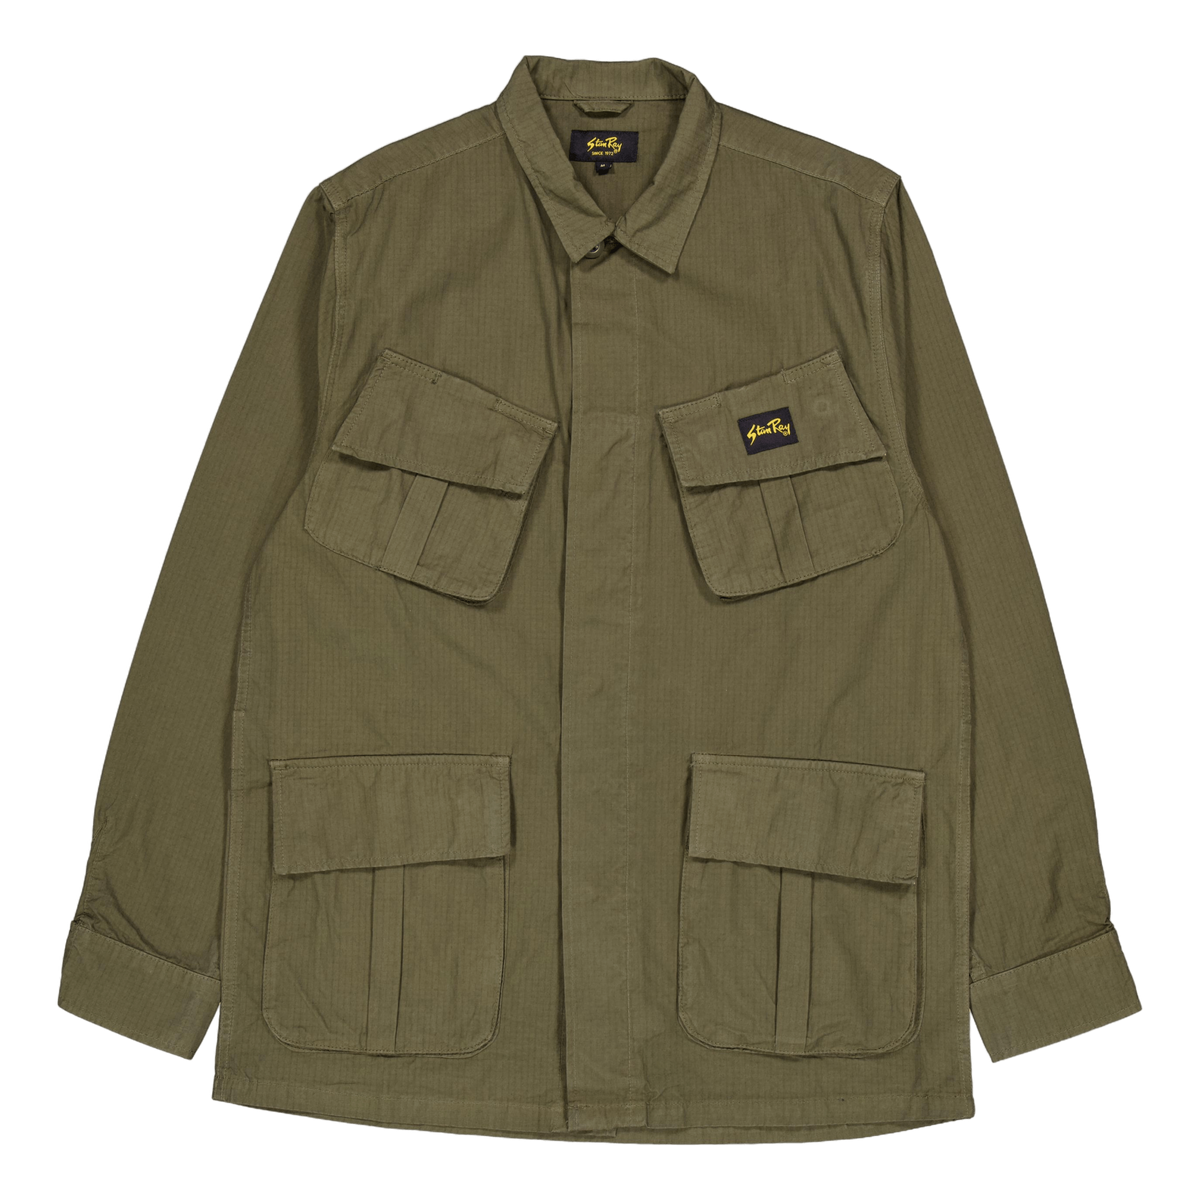 Tropical Jacket Olive Ripstop